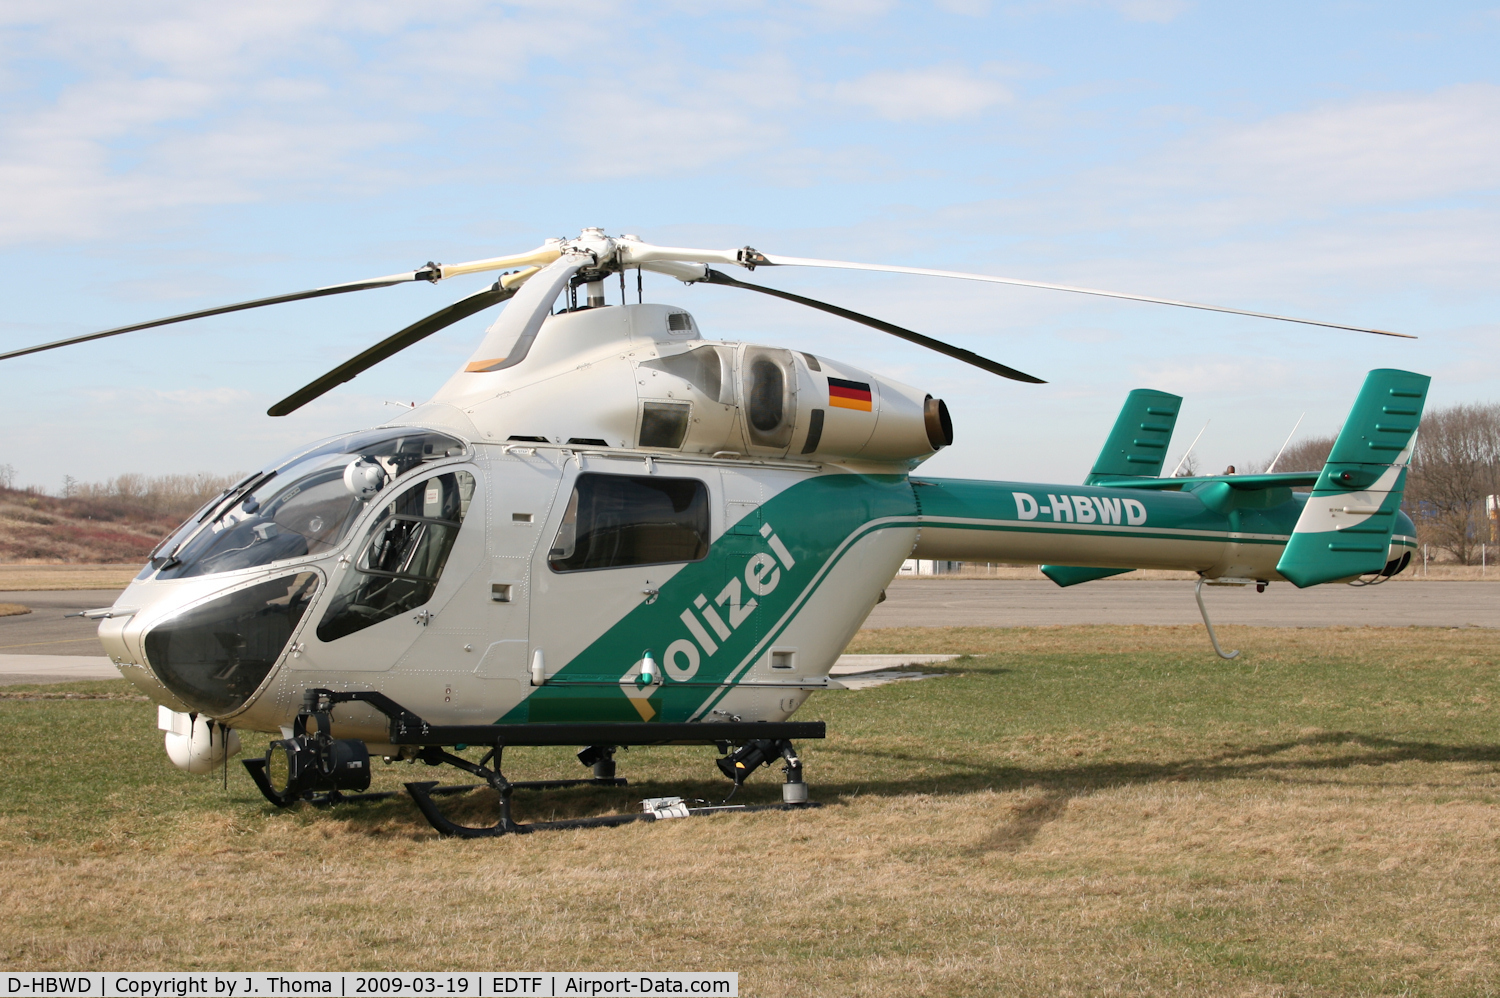 D-HBWD, 2001 MD Helicopters MD-900 Explorer C/N 900-00096, MD Helicopters MD-900 Explorer